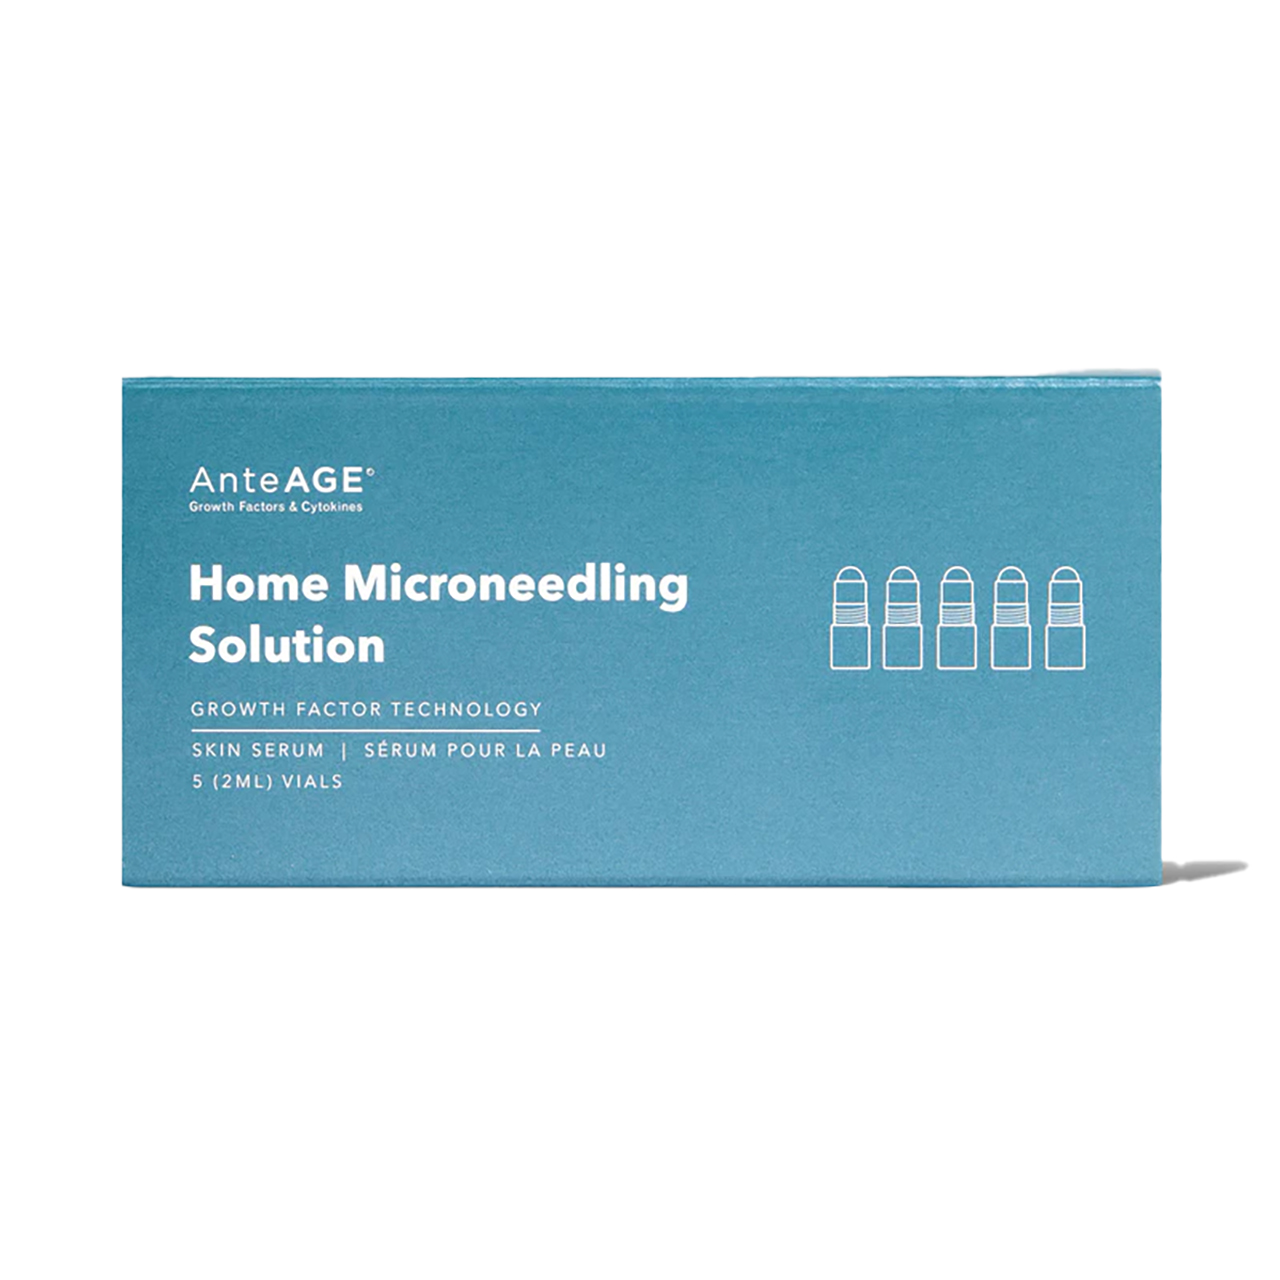 AnteAGE Home Microneedling Solution - 5 x 2 ml (008055) Questions & Answers